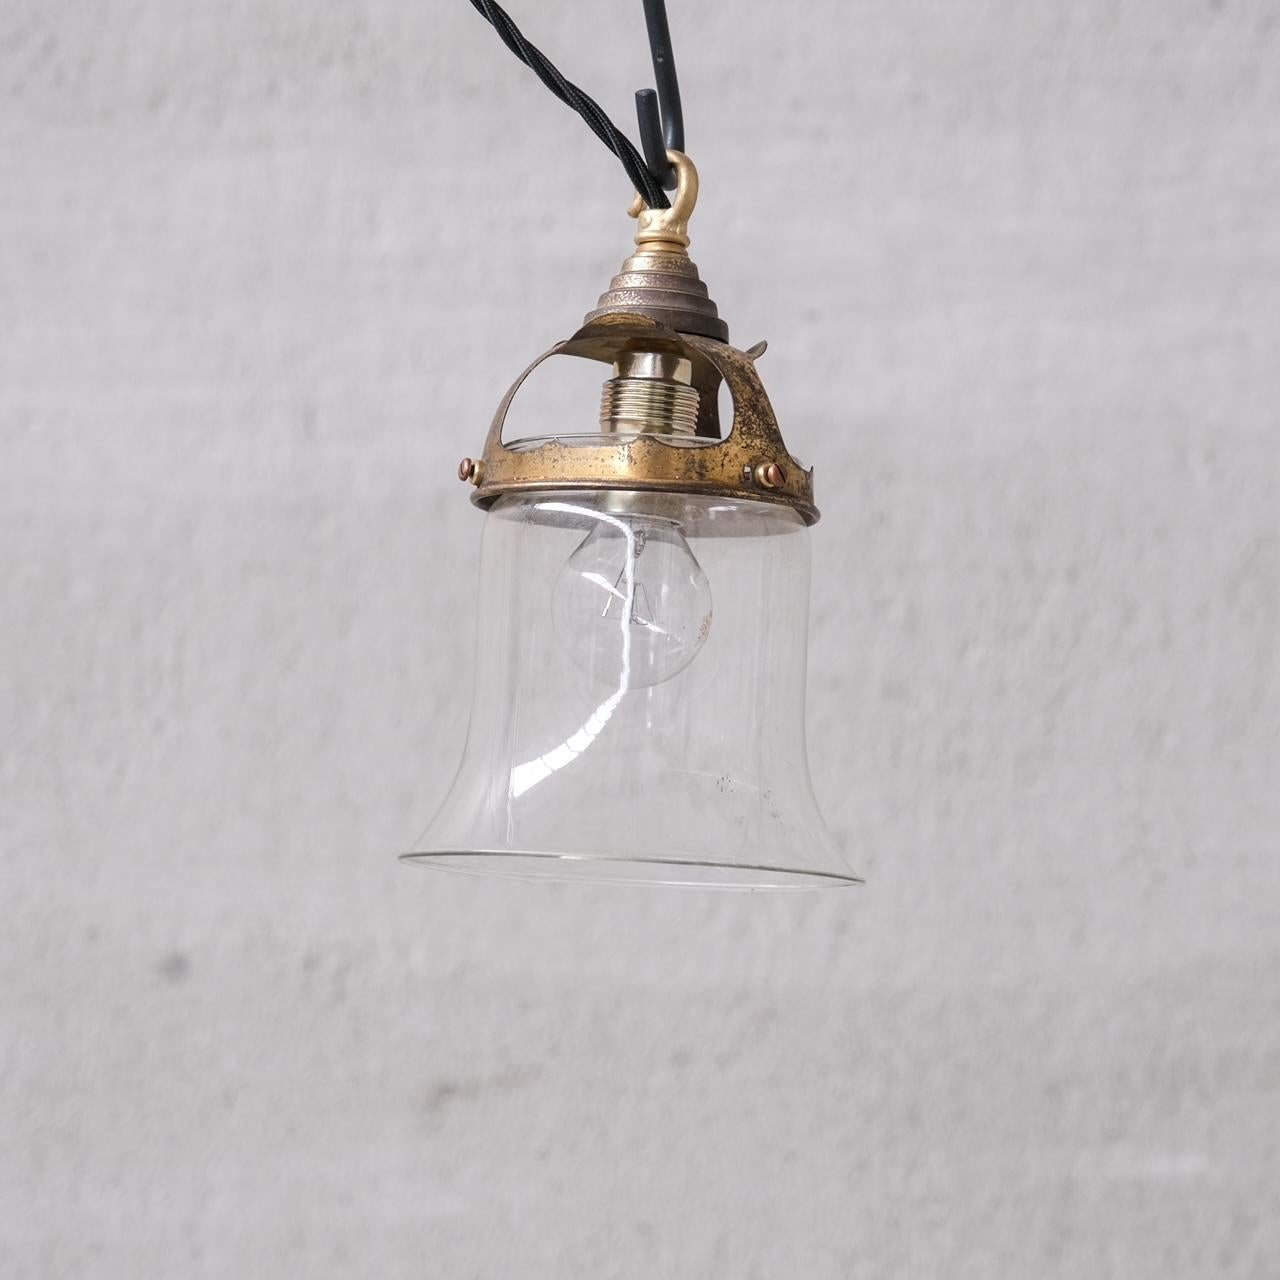 A pair of classy pendants,

France, c1950s.

Brass galleries, paired with open base bell shaped clear glass pendant lights.

PRICE IS FOR THE PAIR.

No rose was retained or chain, however they are easy to source online.

Good vintage condtion,